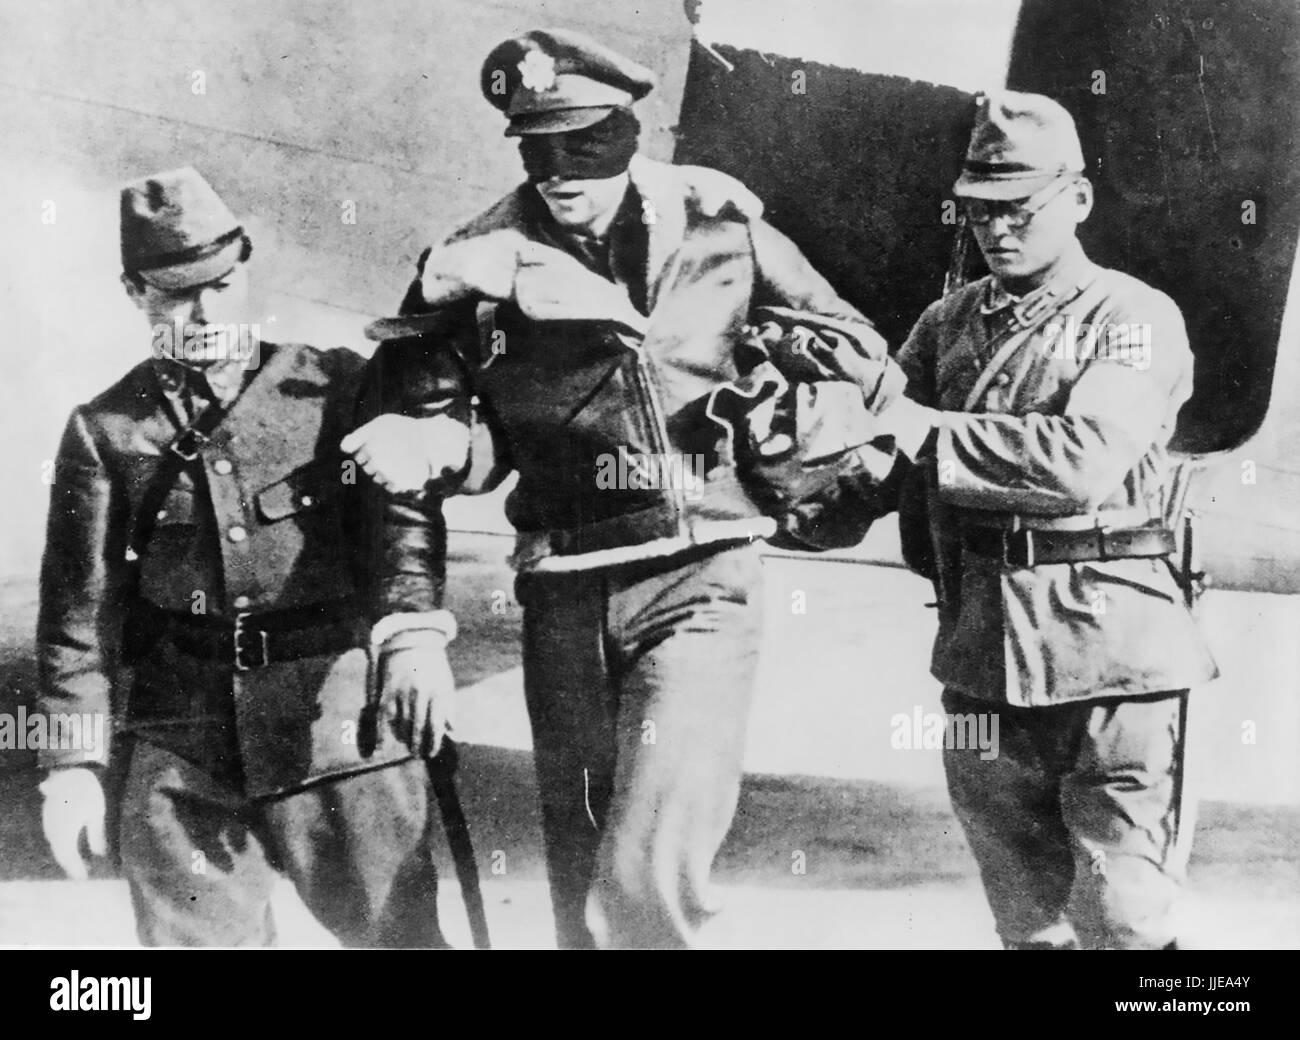 DOOLITTLE RAID ON TOKYO 18 April 1942. Captured US Army Airforce Lt Robert Hite, co-pilot of a B-25B from 34th Bomb Squadron,  is led from a Japanese transport plane. He was liberated from a Shanghai prison on 20 August 1945 Stock Photo